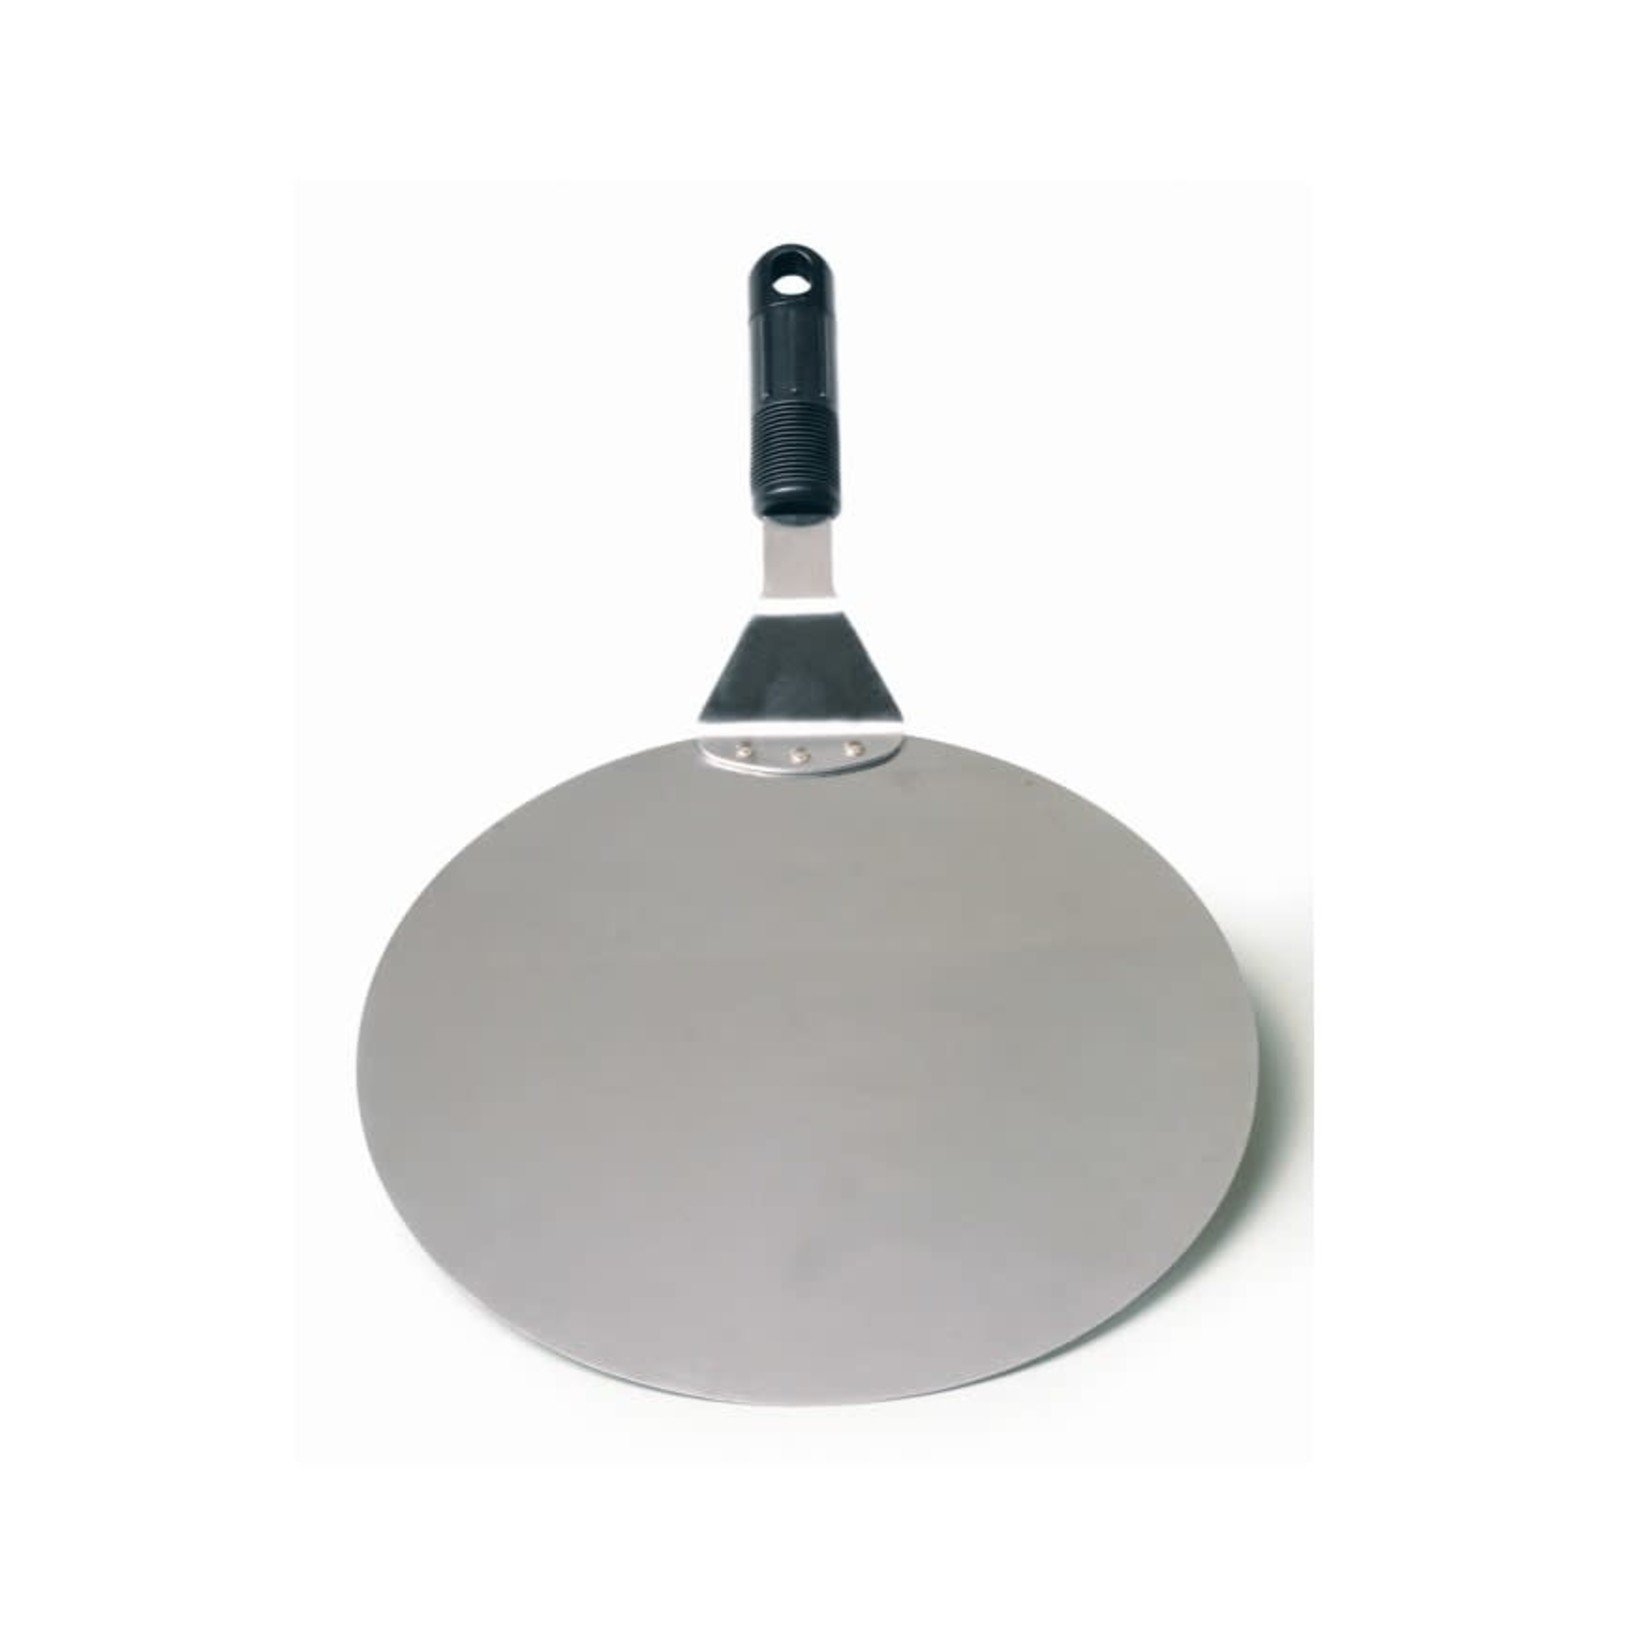 RSVP RSVP Round Oven / Pizza Spatula 12" - Stainless